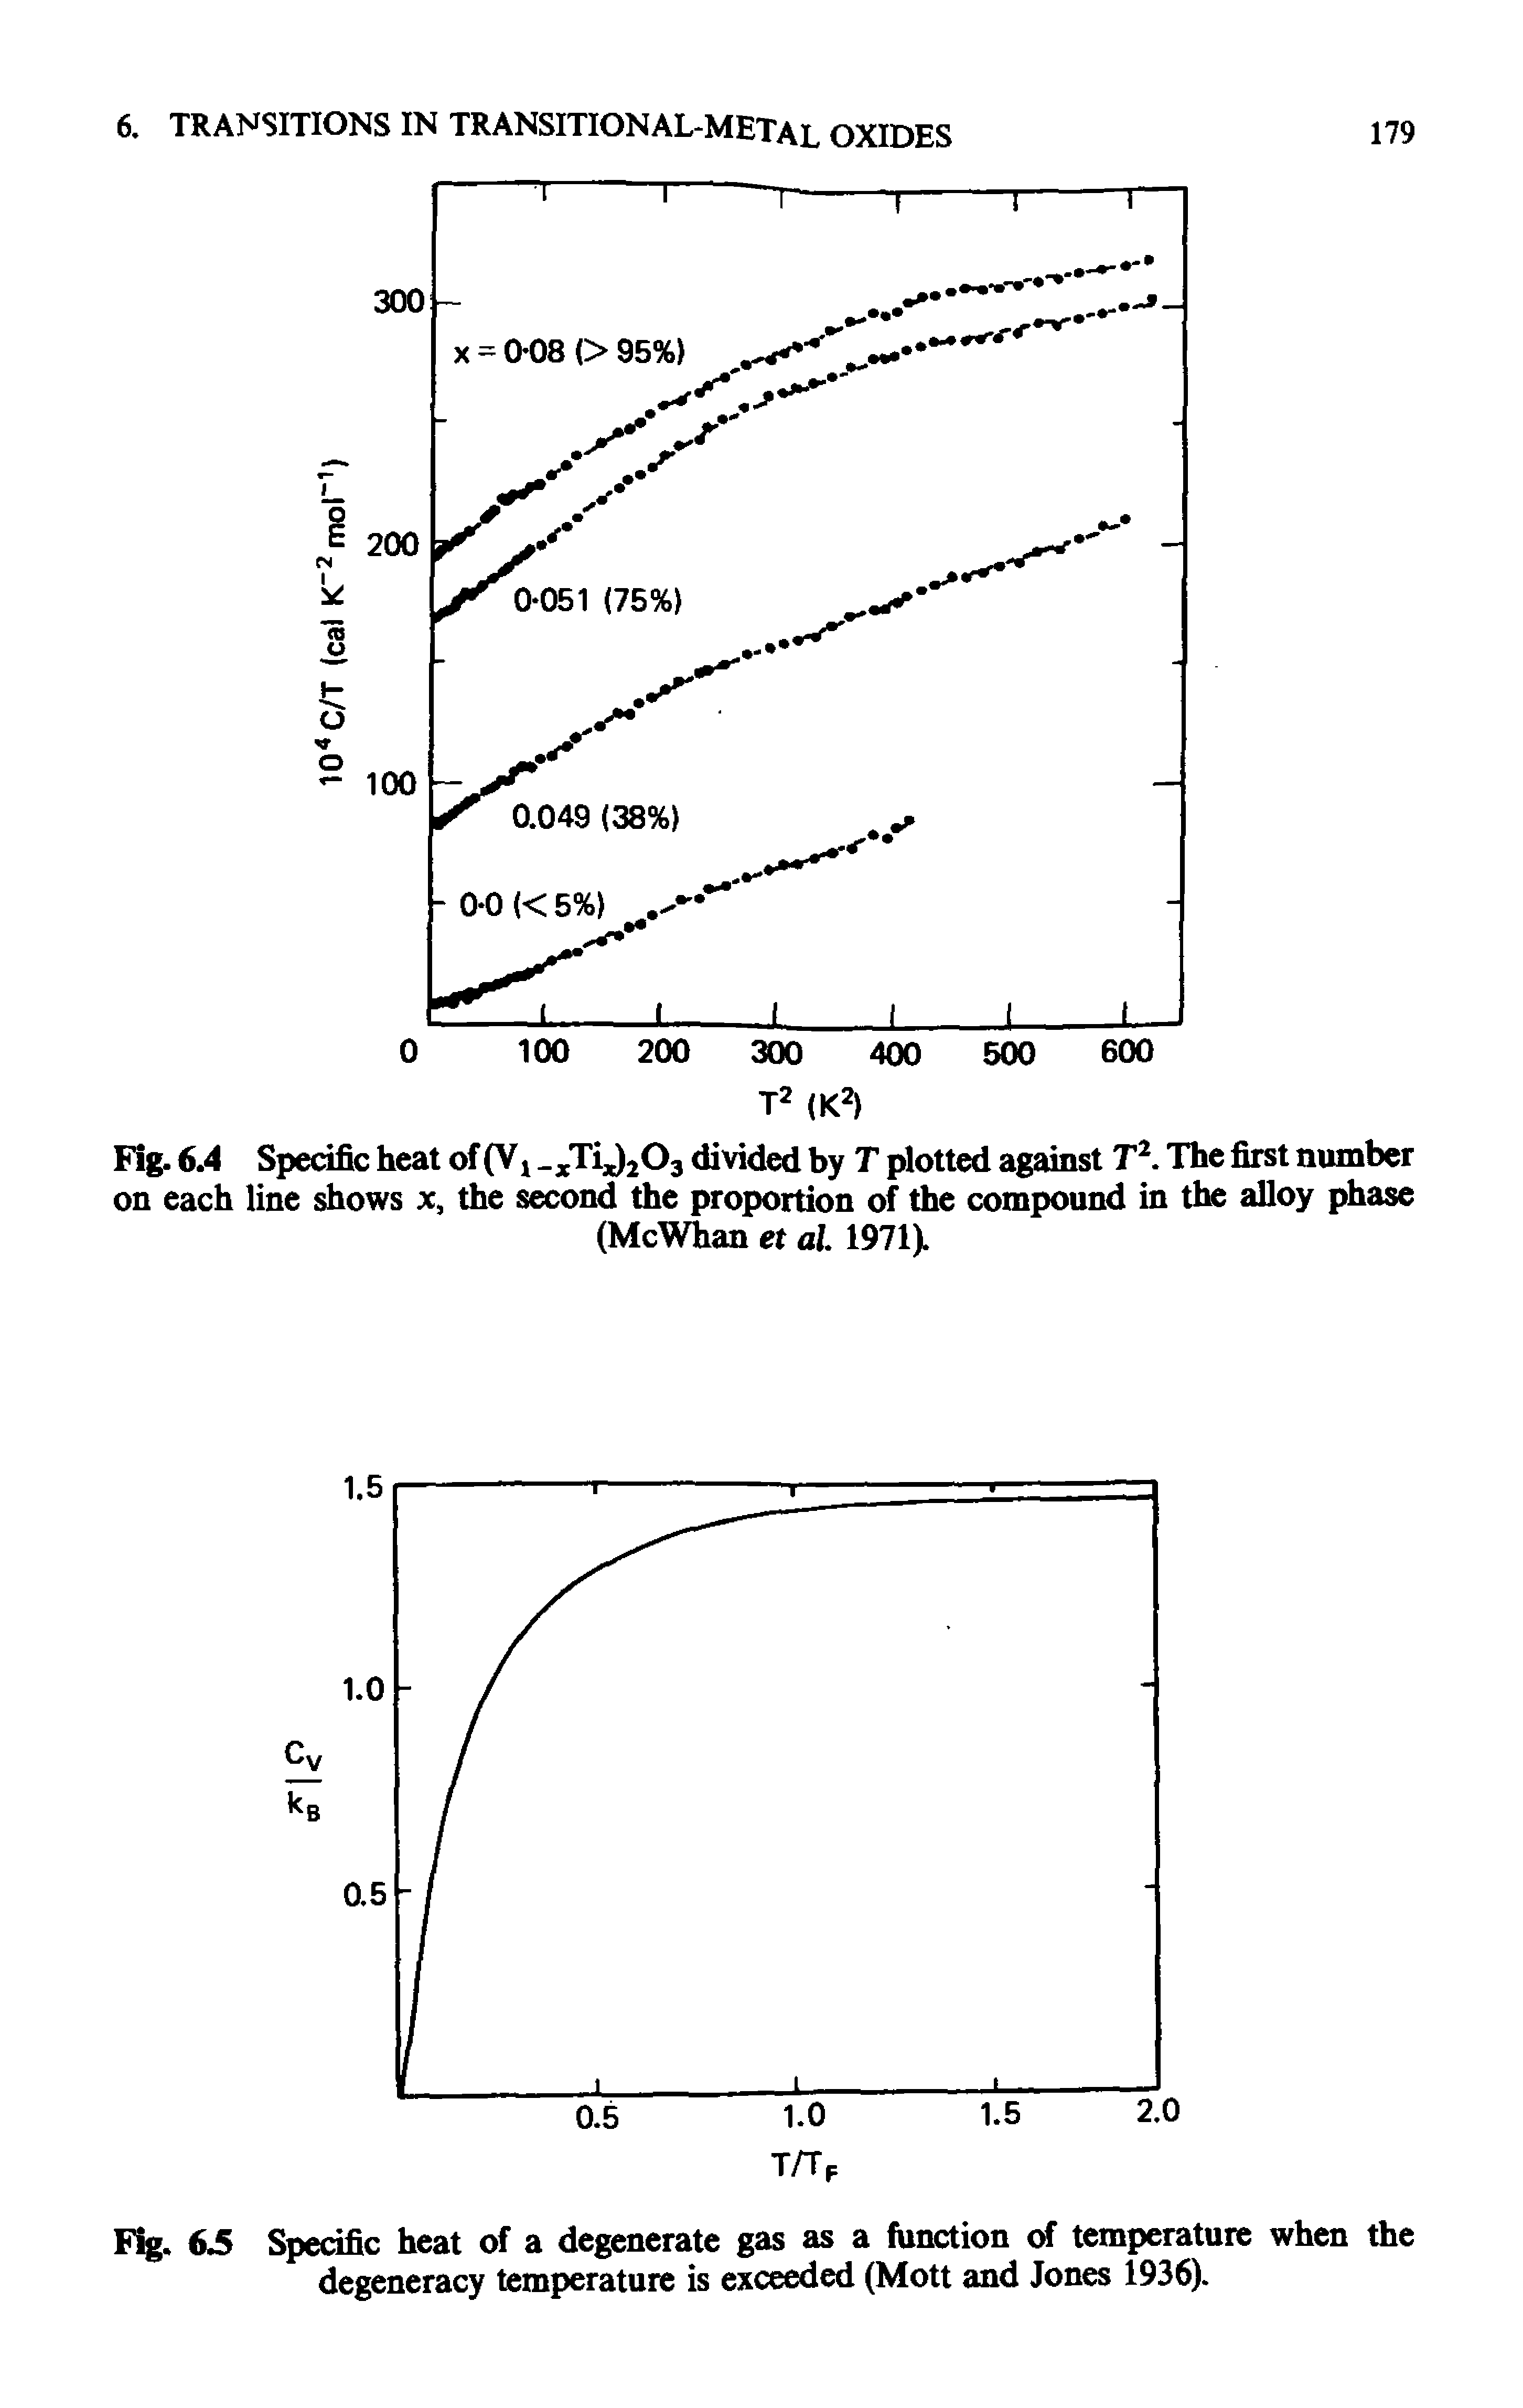 Fig. 6.5 Specific heat of a degenerate gas as a function of temperature when the degeneracy temperature is exceeded (Mott and Jones 1936).